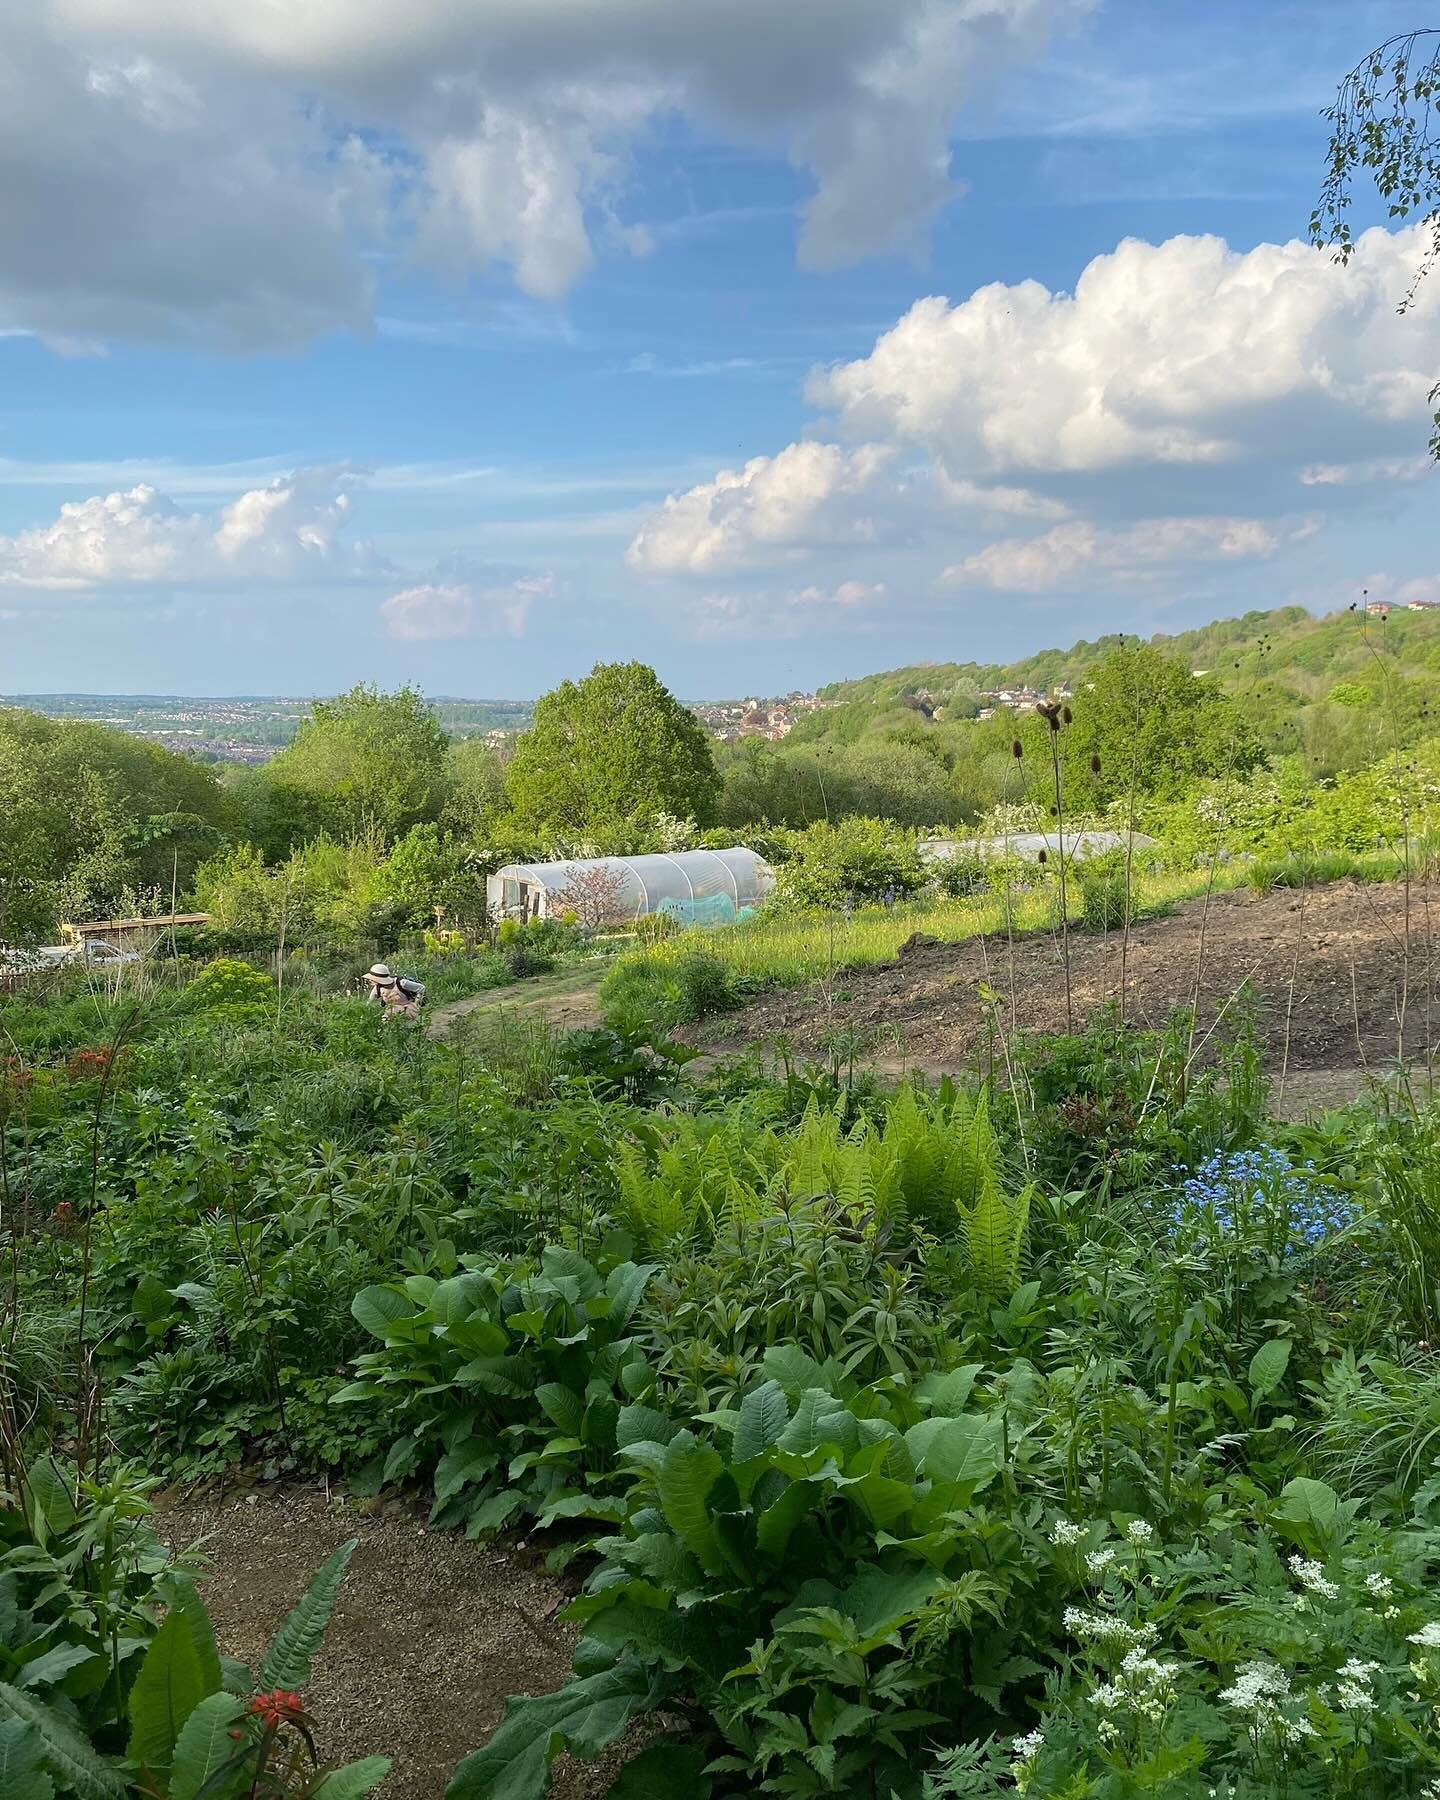 Yesterday&rsquo;s sunny evening was perfect for another @fobsheffield outing - this time to @arcadia_landscape_design in the Rivelin Valley.

Here we met Doug and Charlotte who gave us an introduction to their experimental garden and nursery on the o